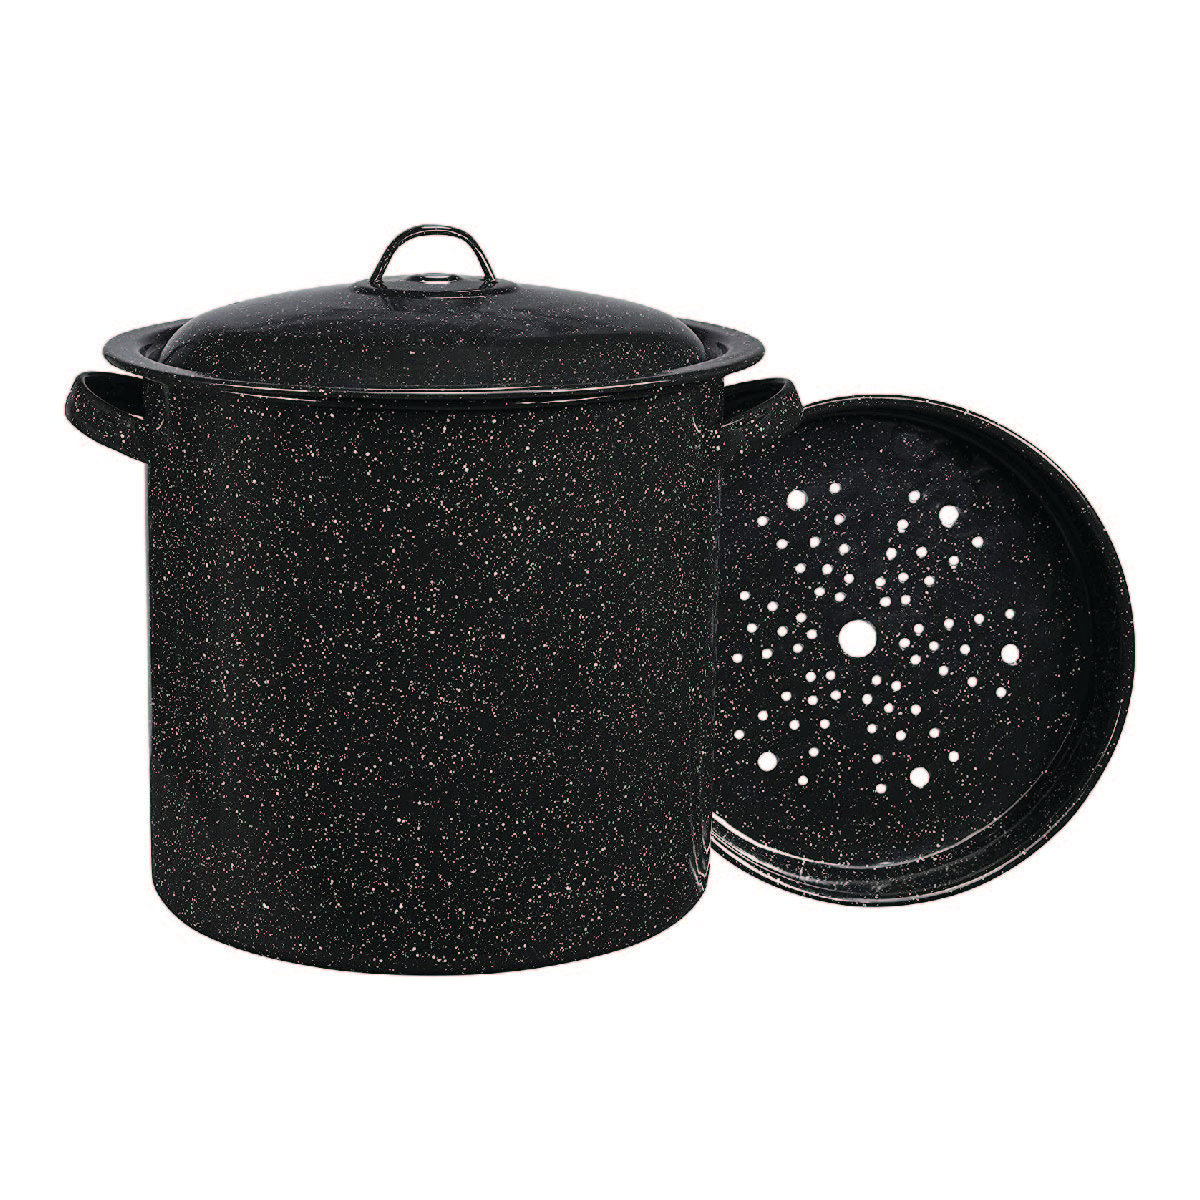 A large black steamer pot with a strainer insert.